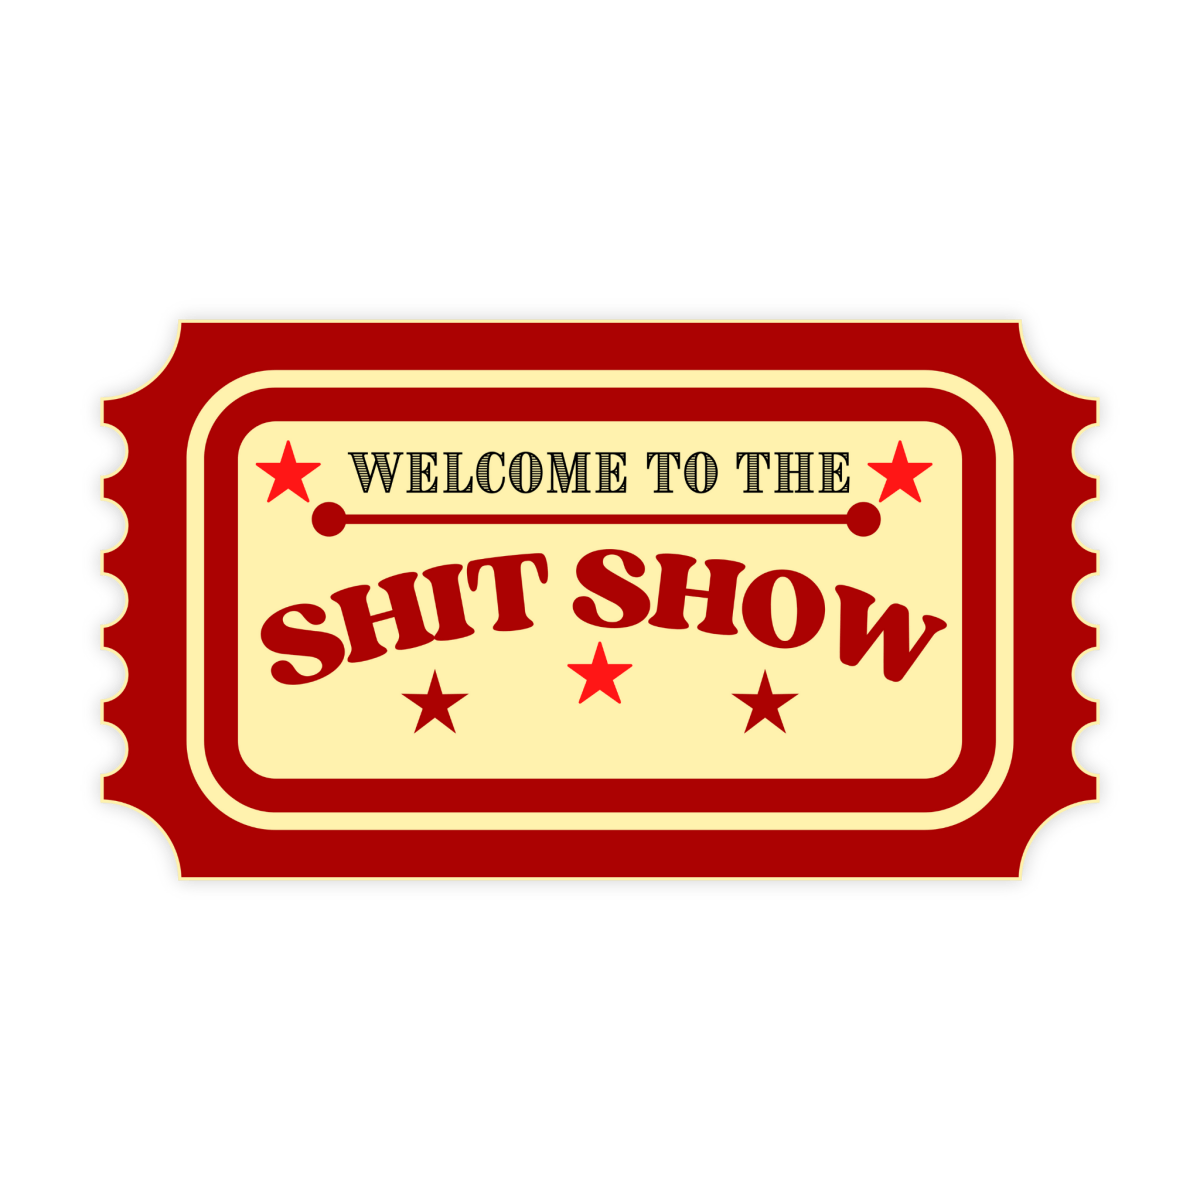 Welcome To The Shit Show Sticker - stickerbullWelcome To The Shit Show StickerRetail StickerstickerbullstickerbullSage_ShitshowOG [#180]Welcome To The Shit Show Sticker